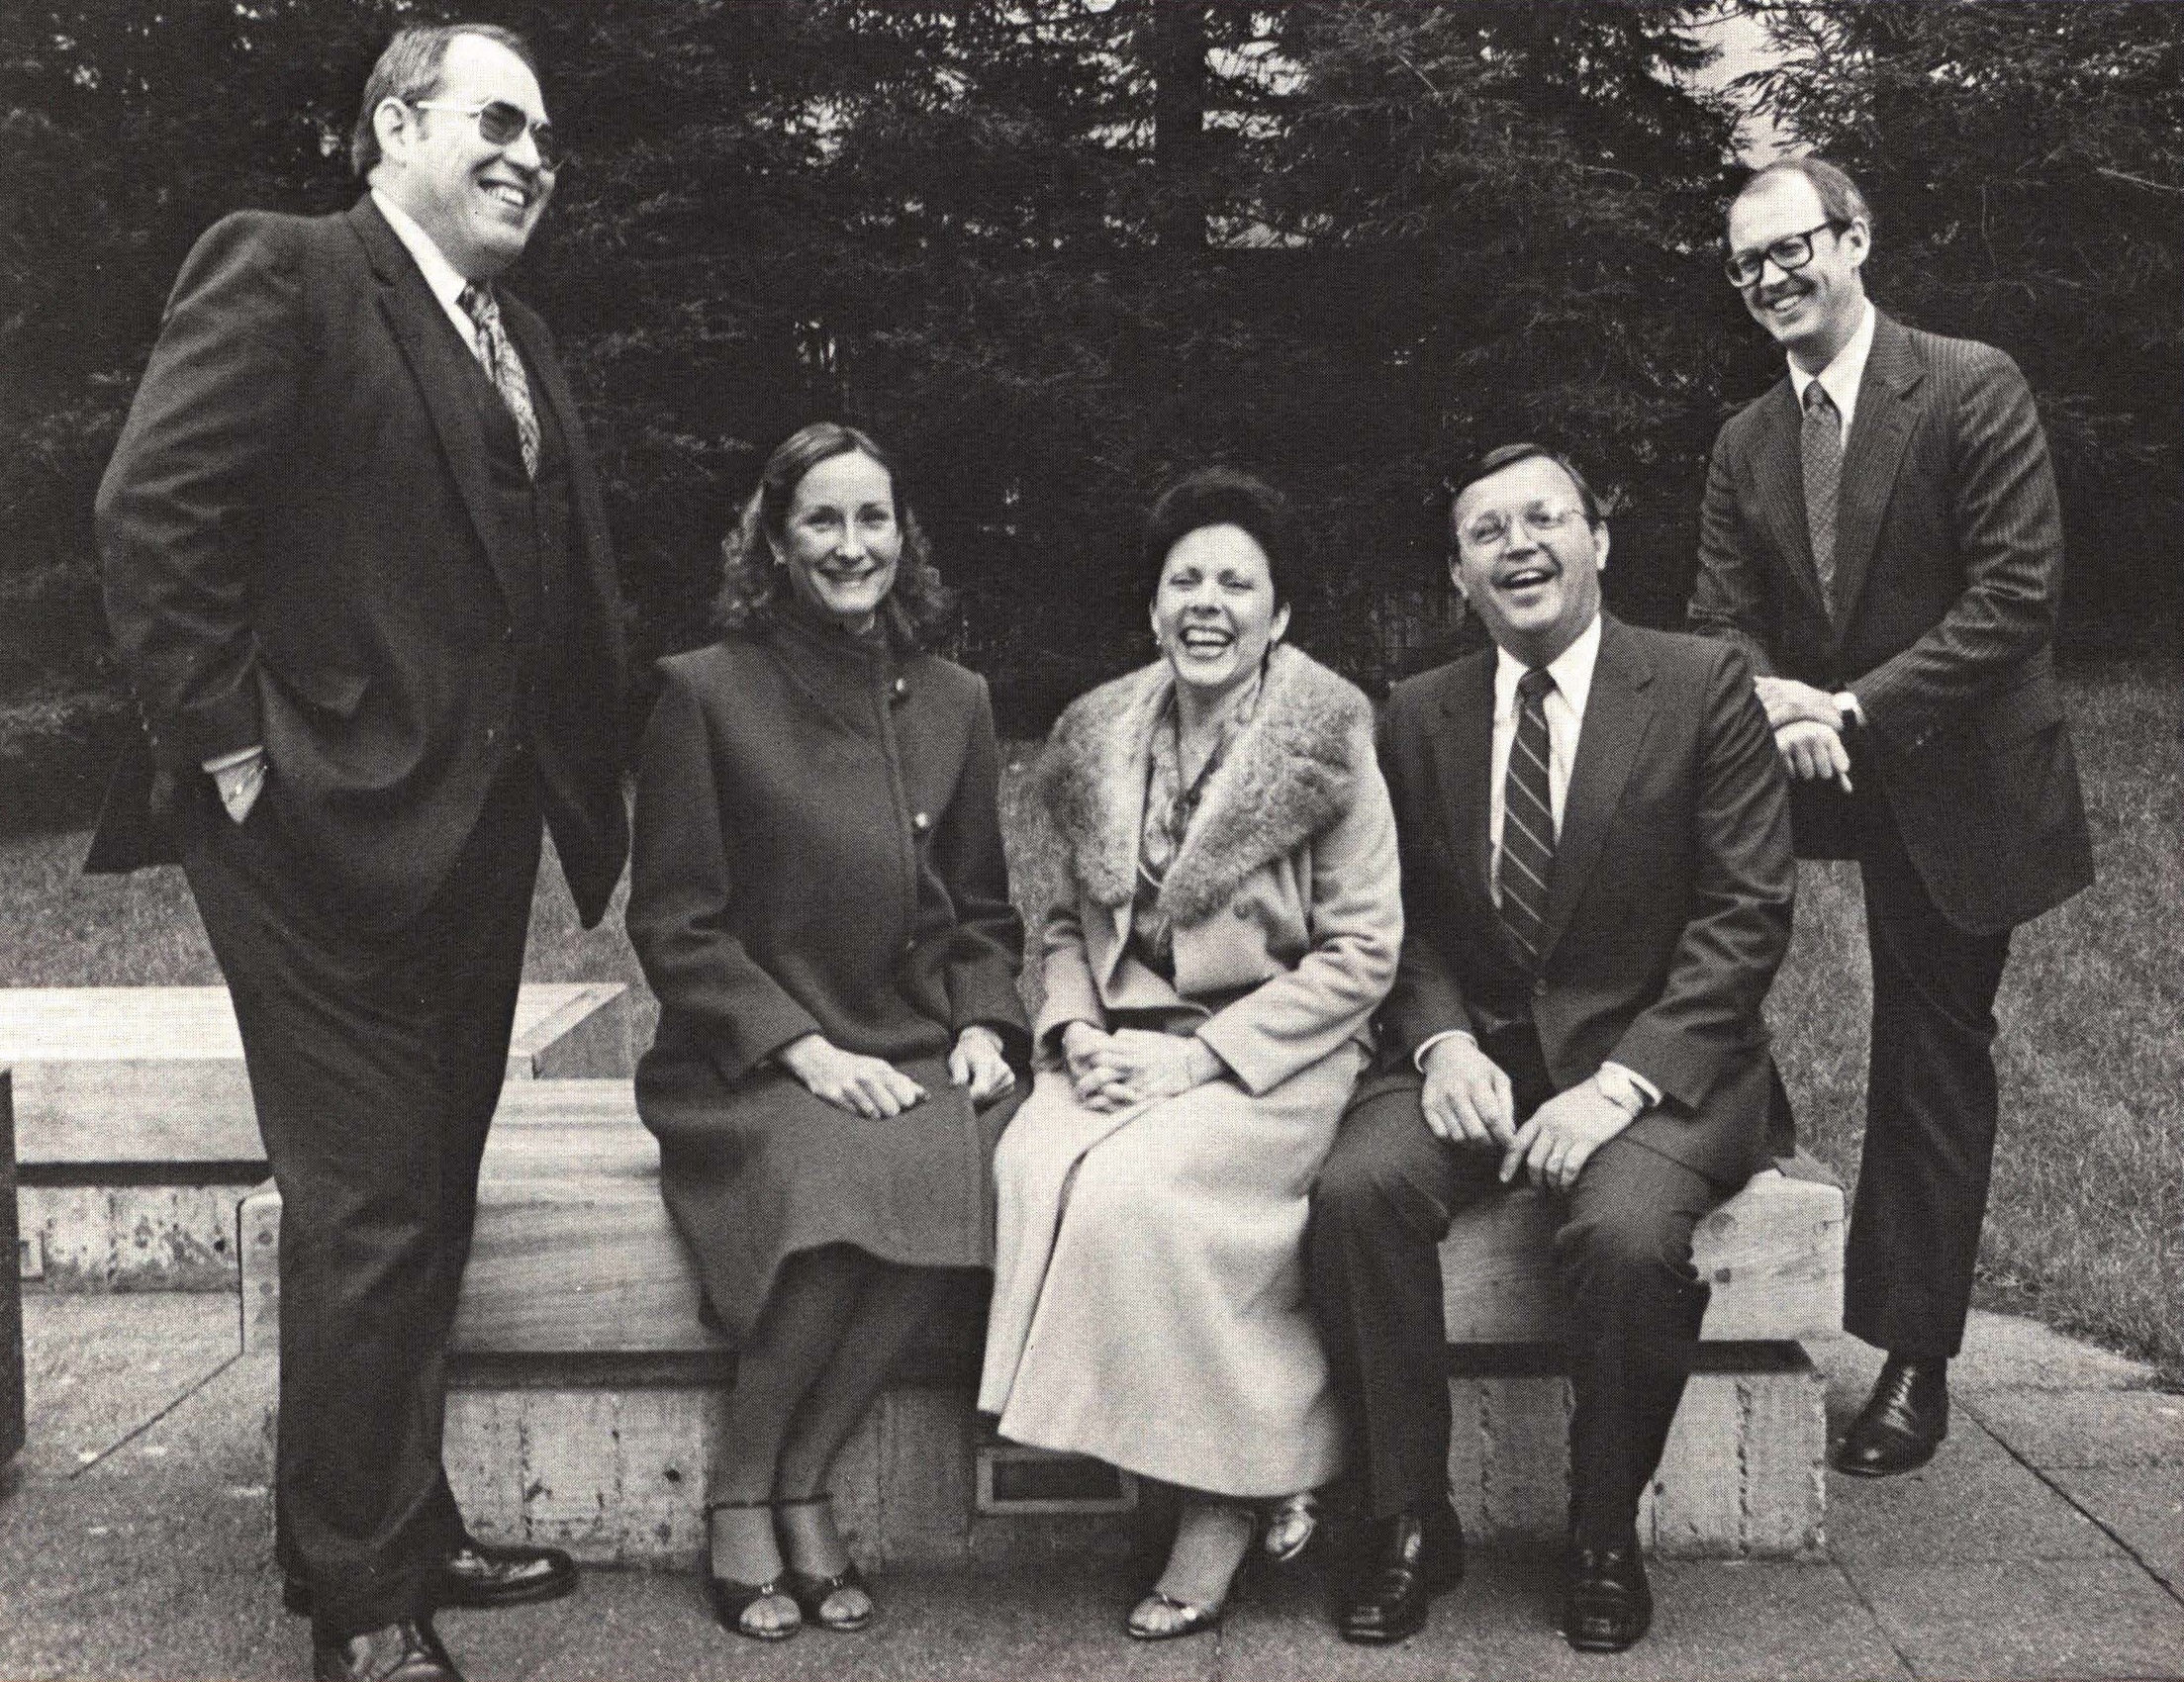 Black and white photograph featuring 5 people outside. Two stand and three sit on a concrete bench.